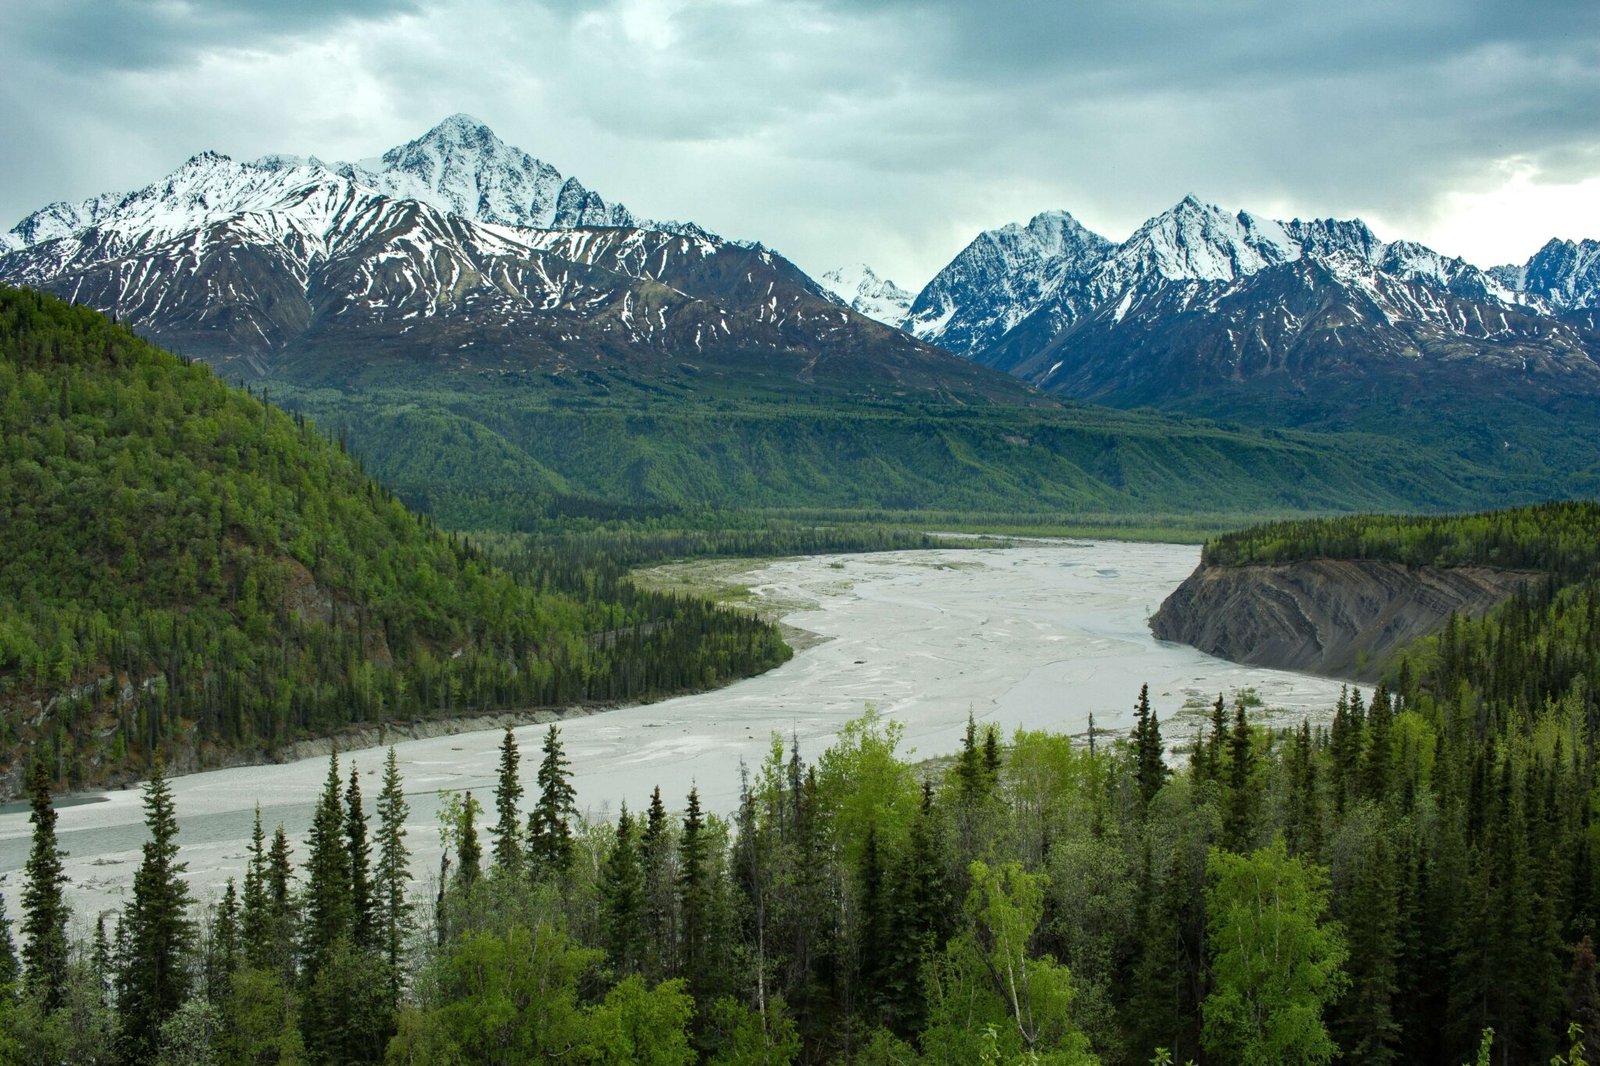 Alaska, places to visit this year